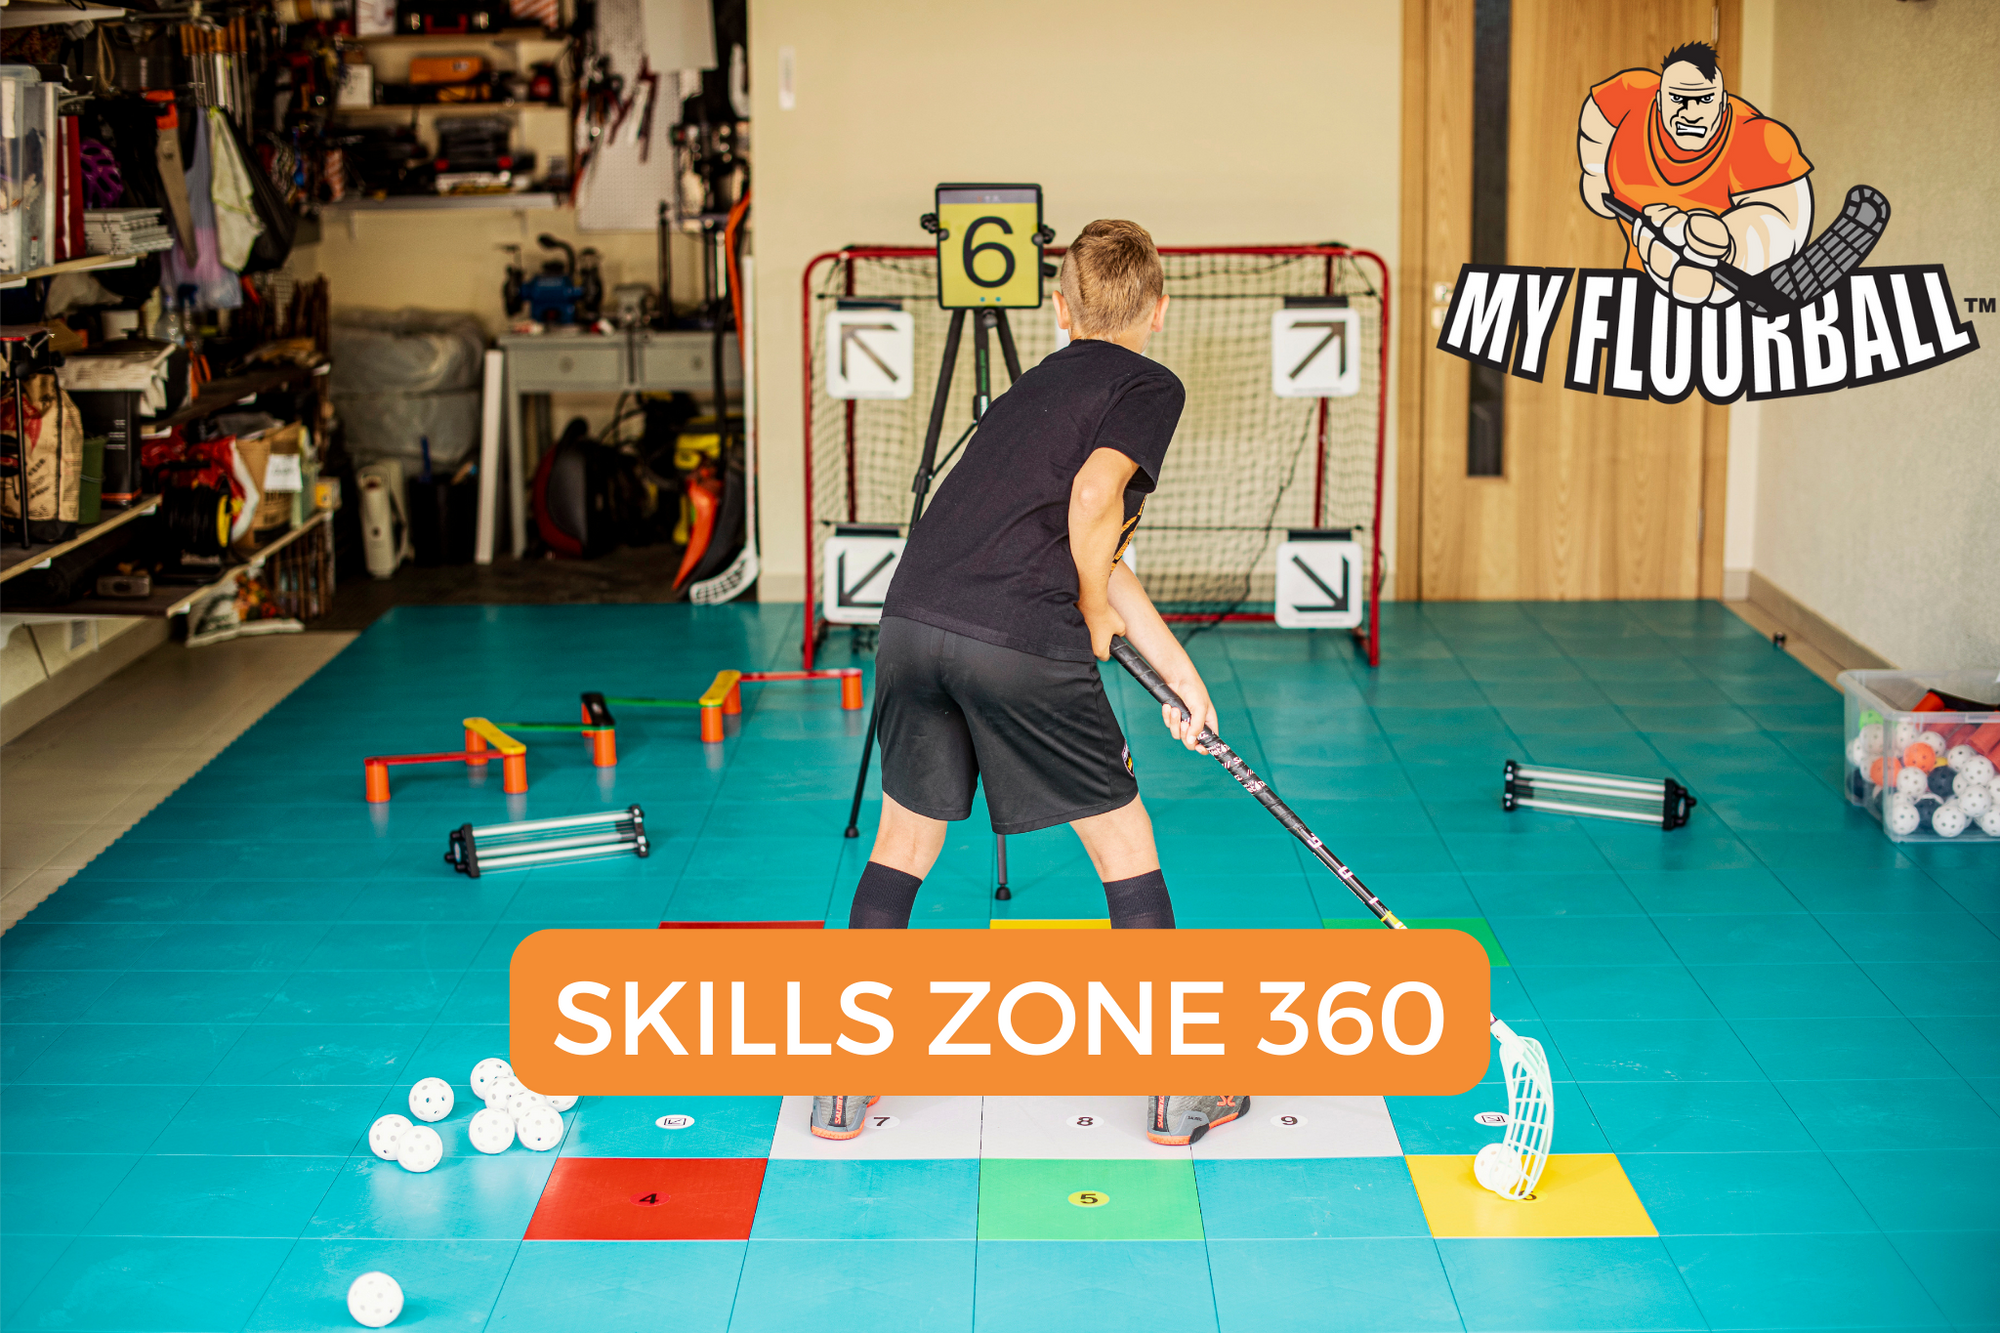 Elevate Your Floorball Game with My Floorball's Skills Zone 360